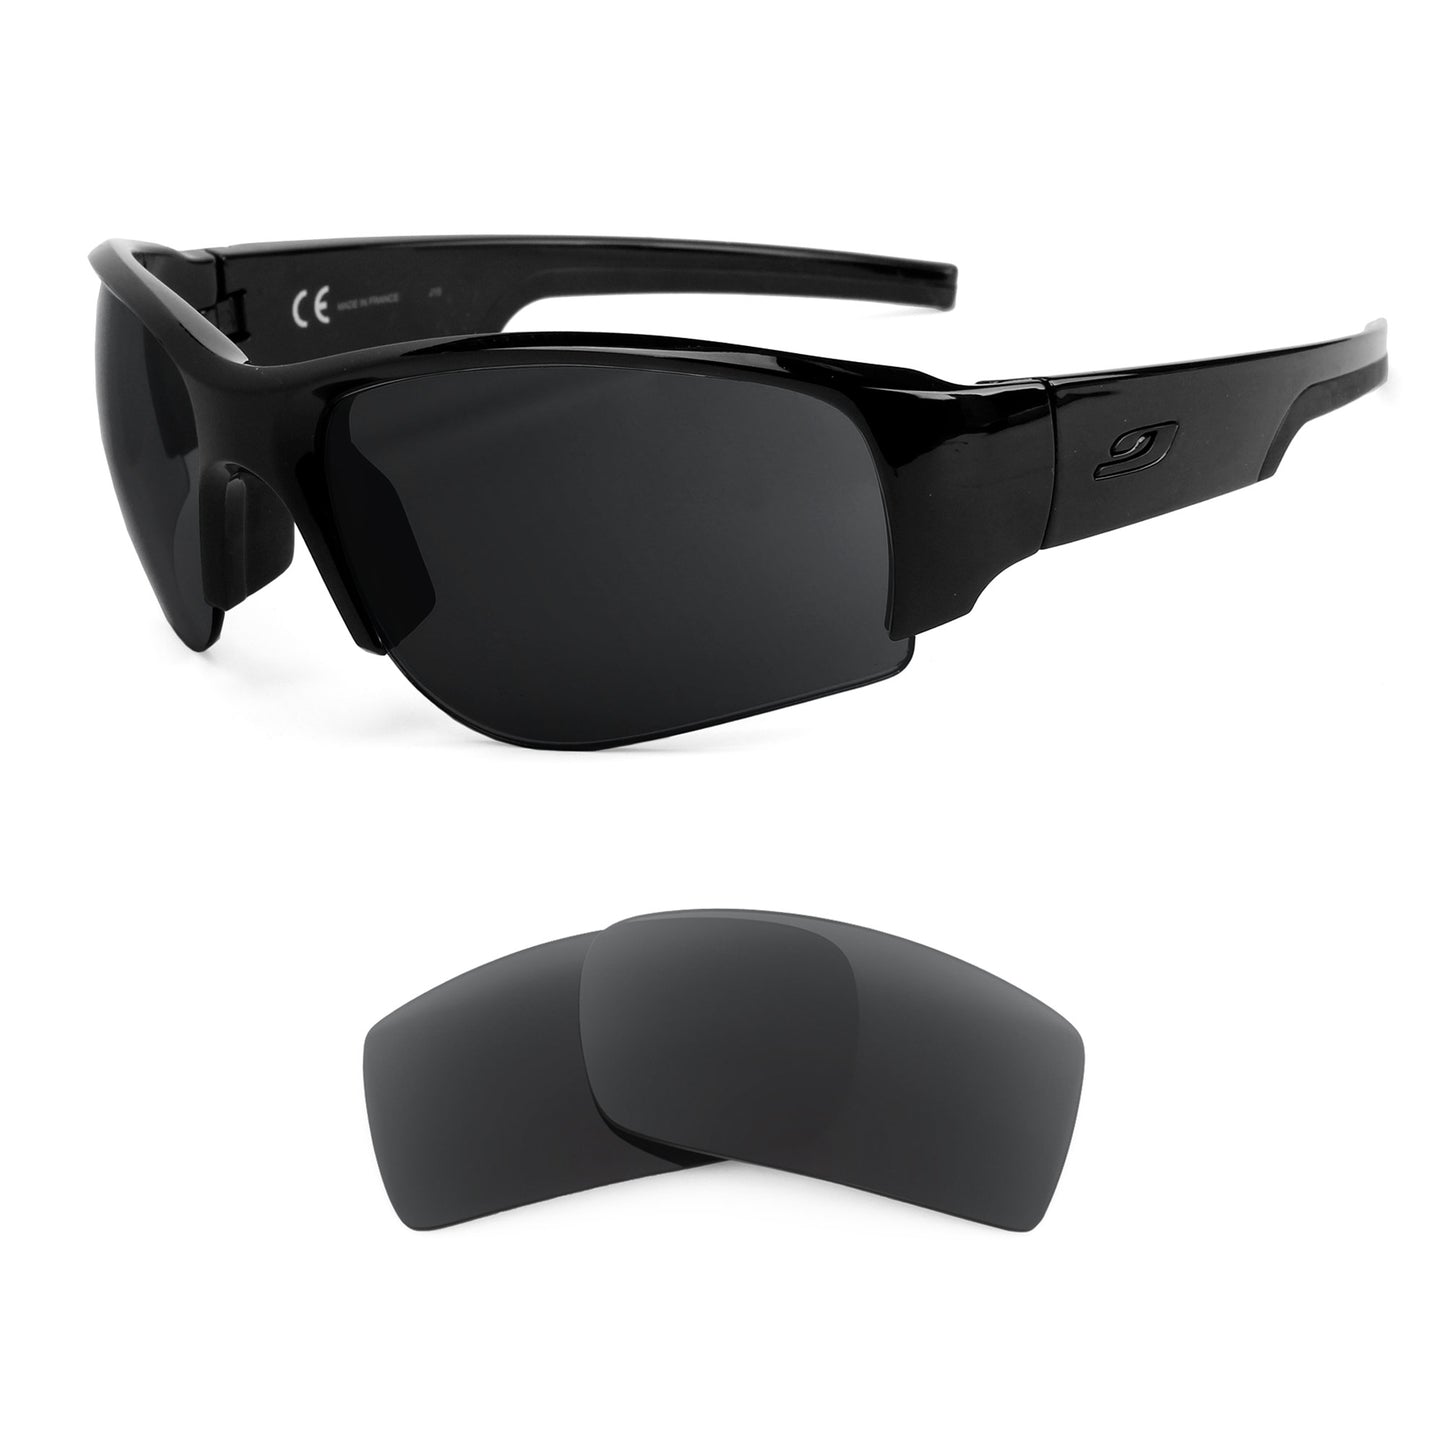 Julbo Dust sunglasses with replacement lenses